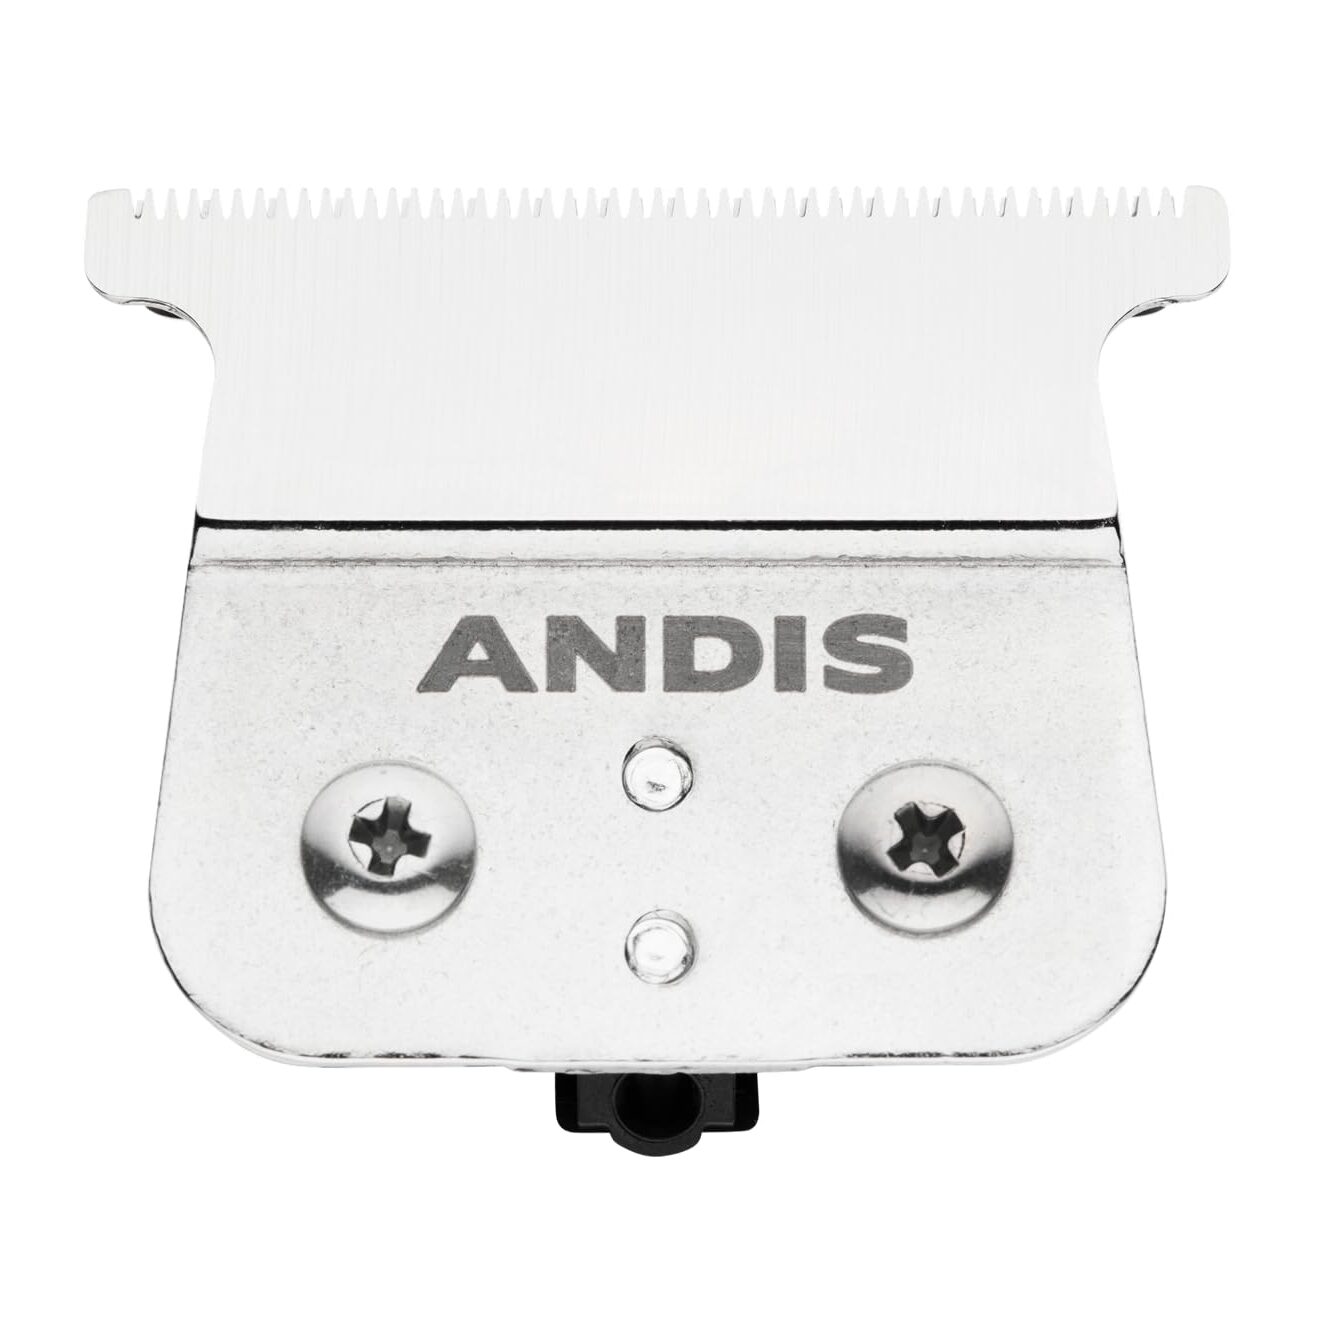 A white andis blade with the logo of andis.